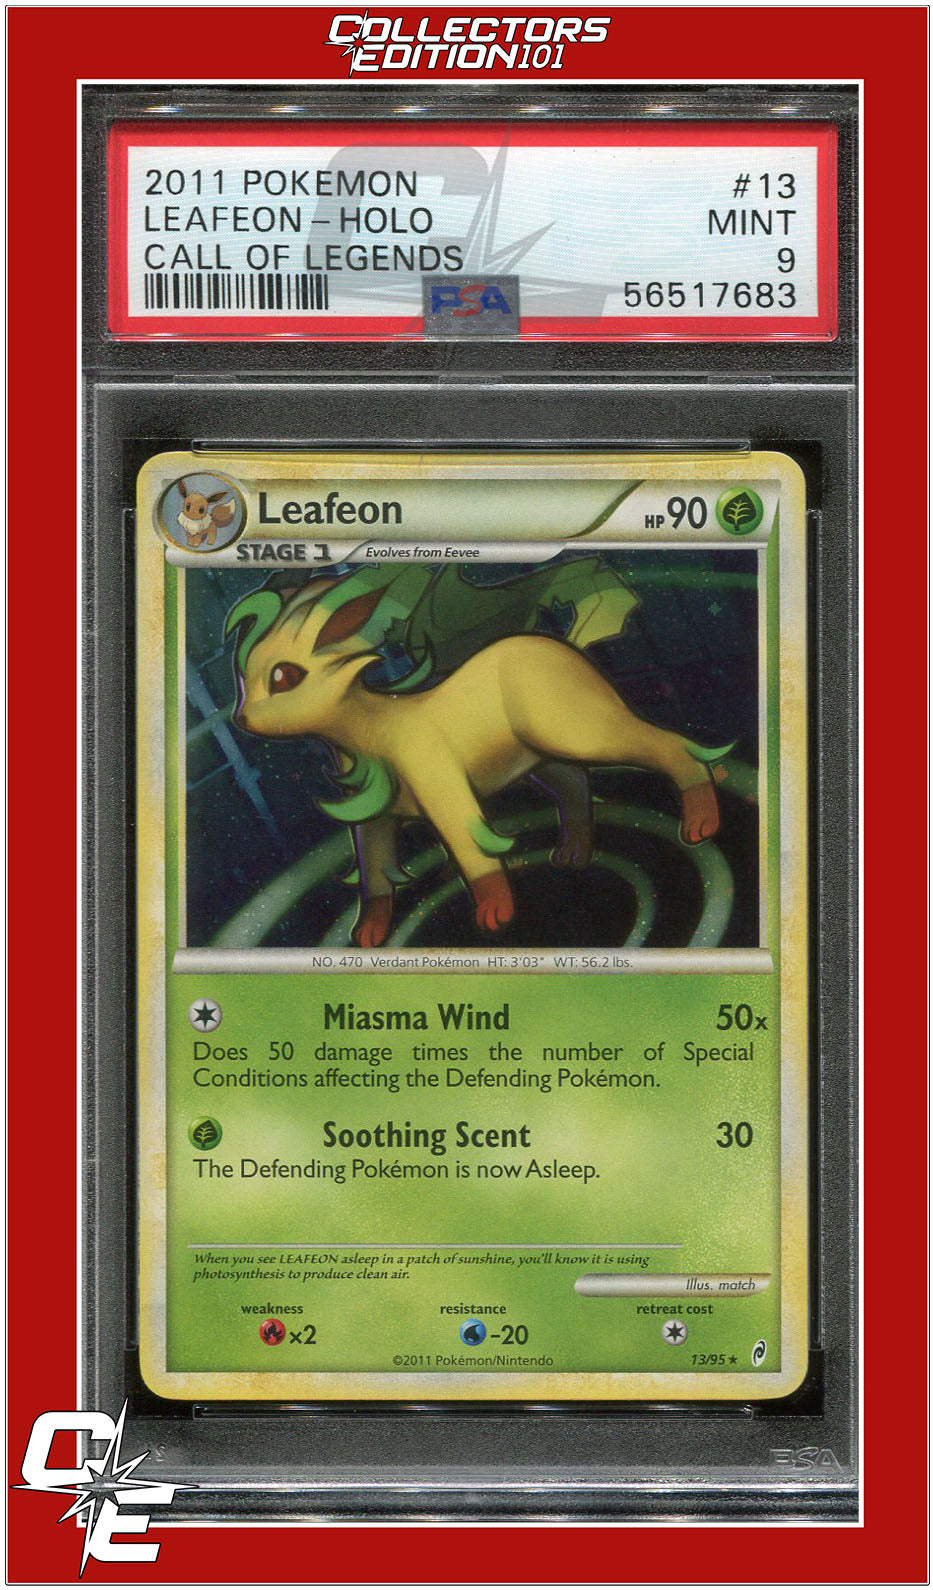 Call of Legends 13 Leafeon Holo PSA 9